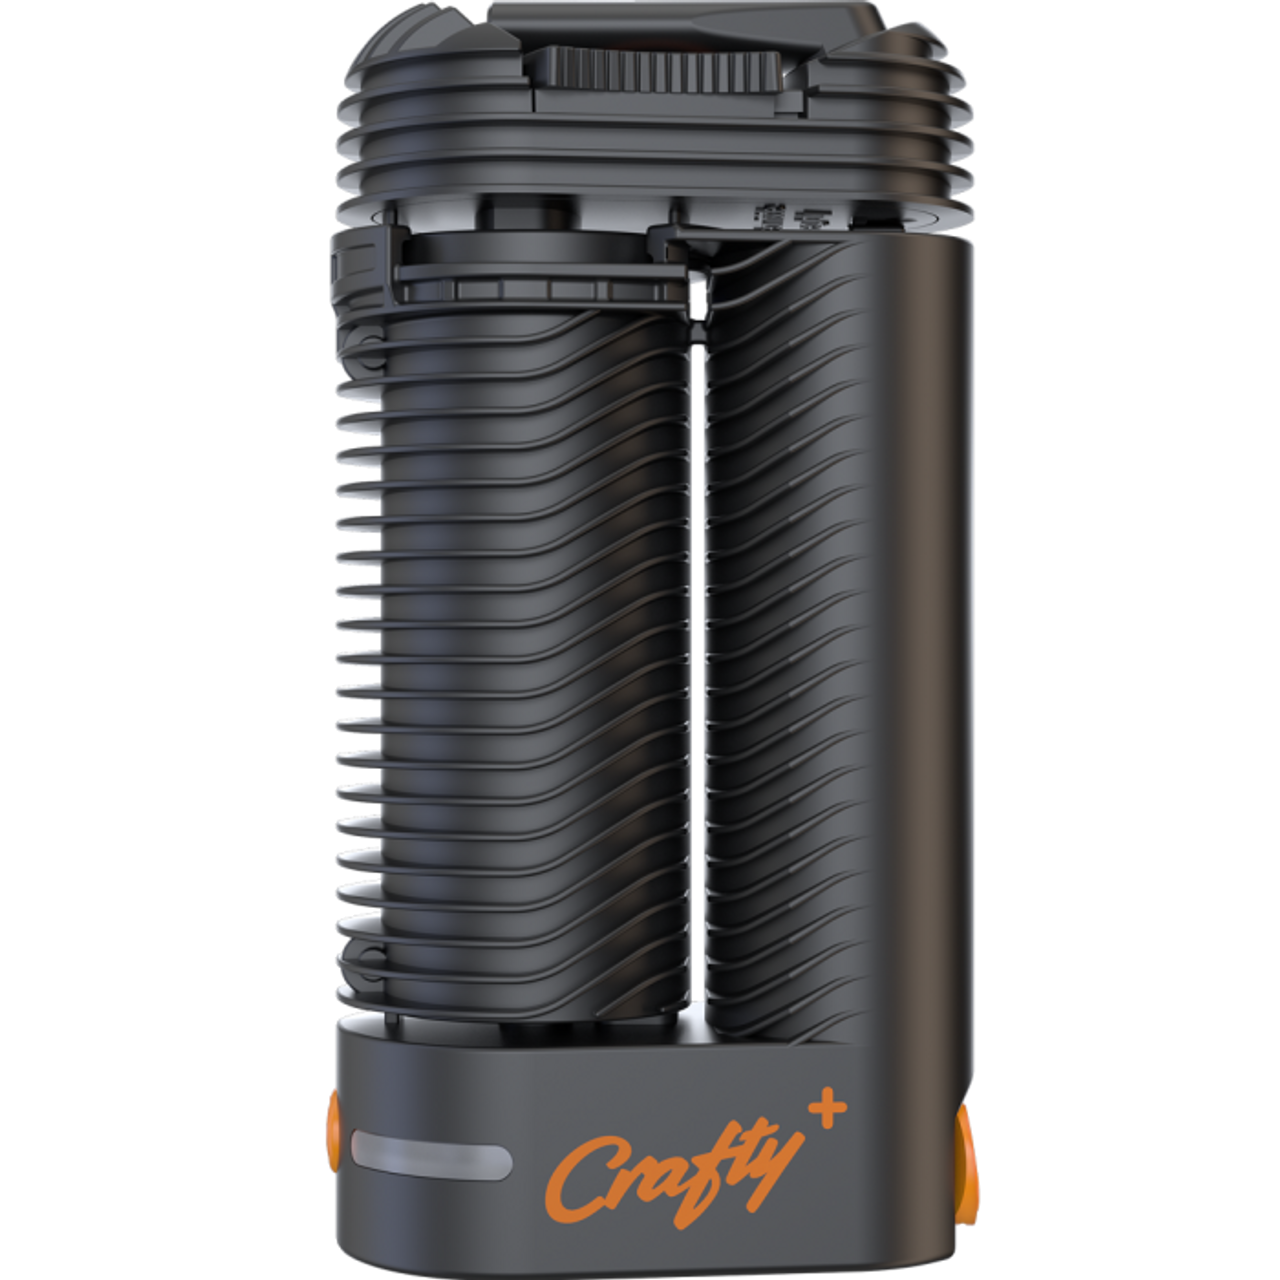 Storz and Bickel Storz and Bickel Crafty Vaporizer at The Cloud Supply